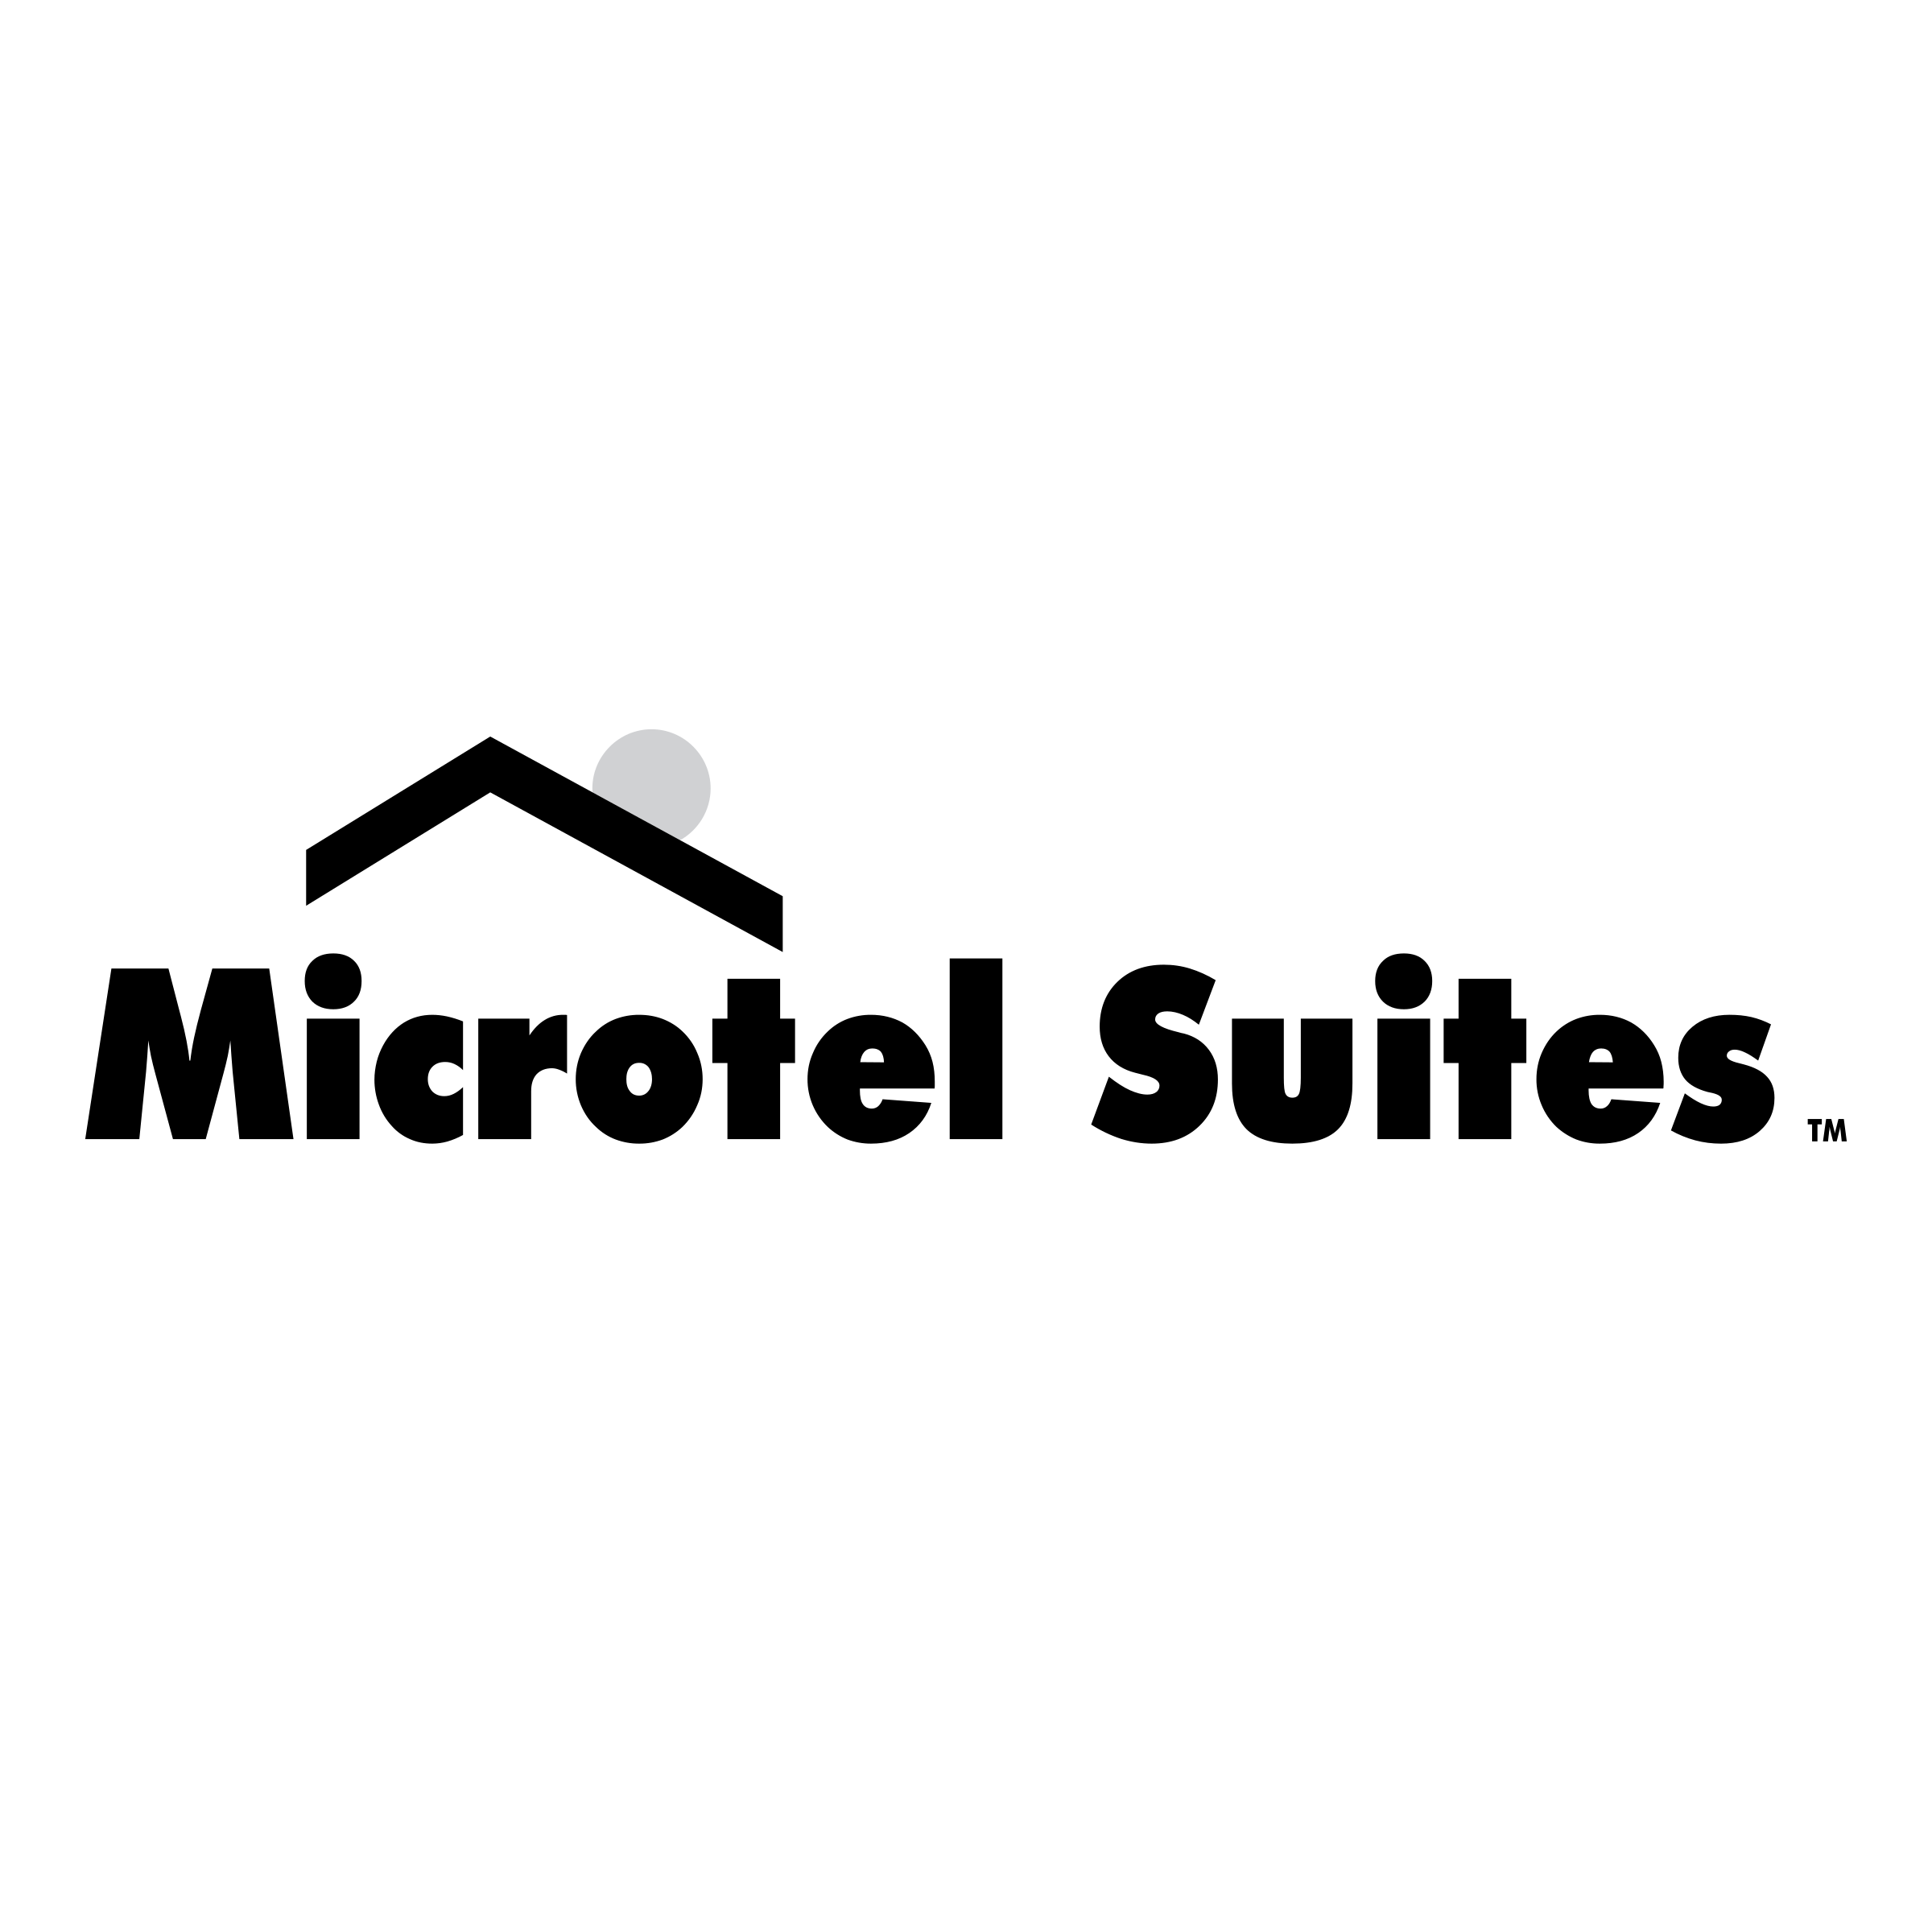 Microtel Logo - Microtel Suites Logo PNG Transparent & SVG Vector - Freebie Supply